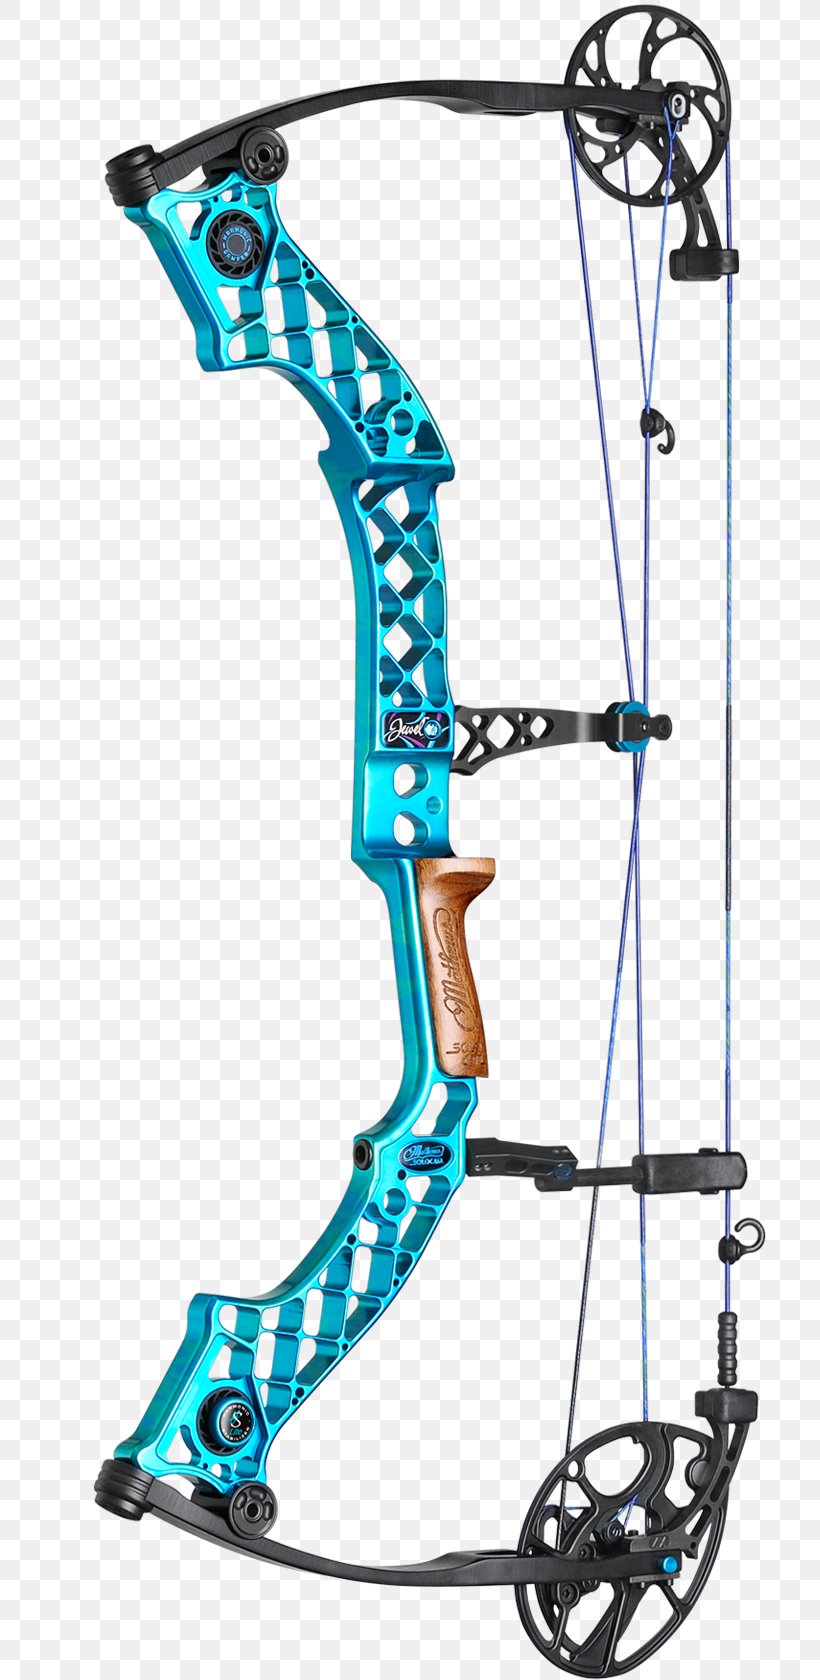 Compound Bows Bow And Arrow Archery Bowhunting, PNG, 722x1680px, Compound Bows, Abbey Archery Pty Ltd, Archery, Bicycle Accessory, Bicycle Frame Download Free